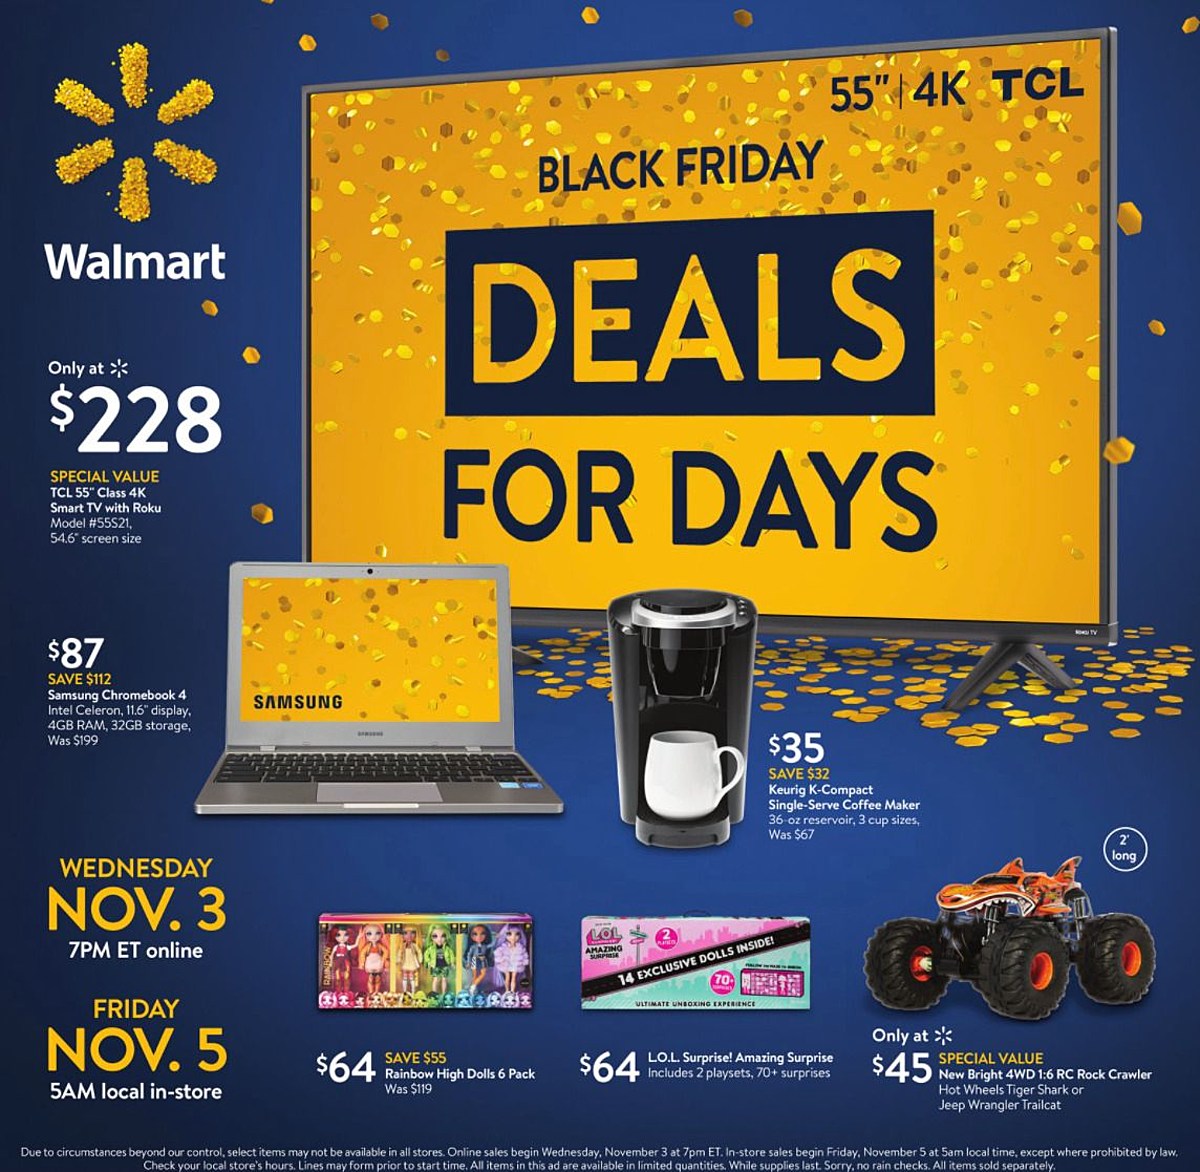 Walmart's 2021 Black Friday Deals Have Been Announced - Will Black Friday Have Cable Deals